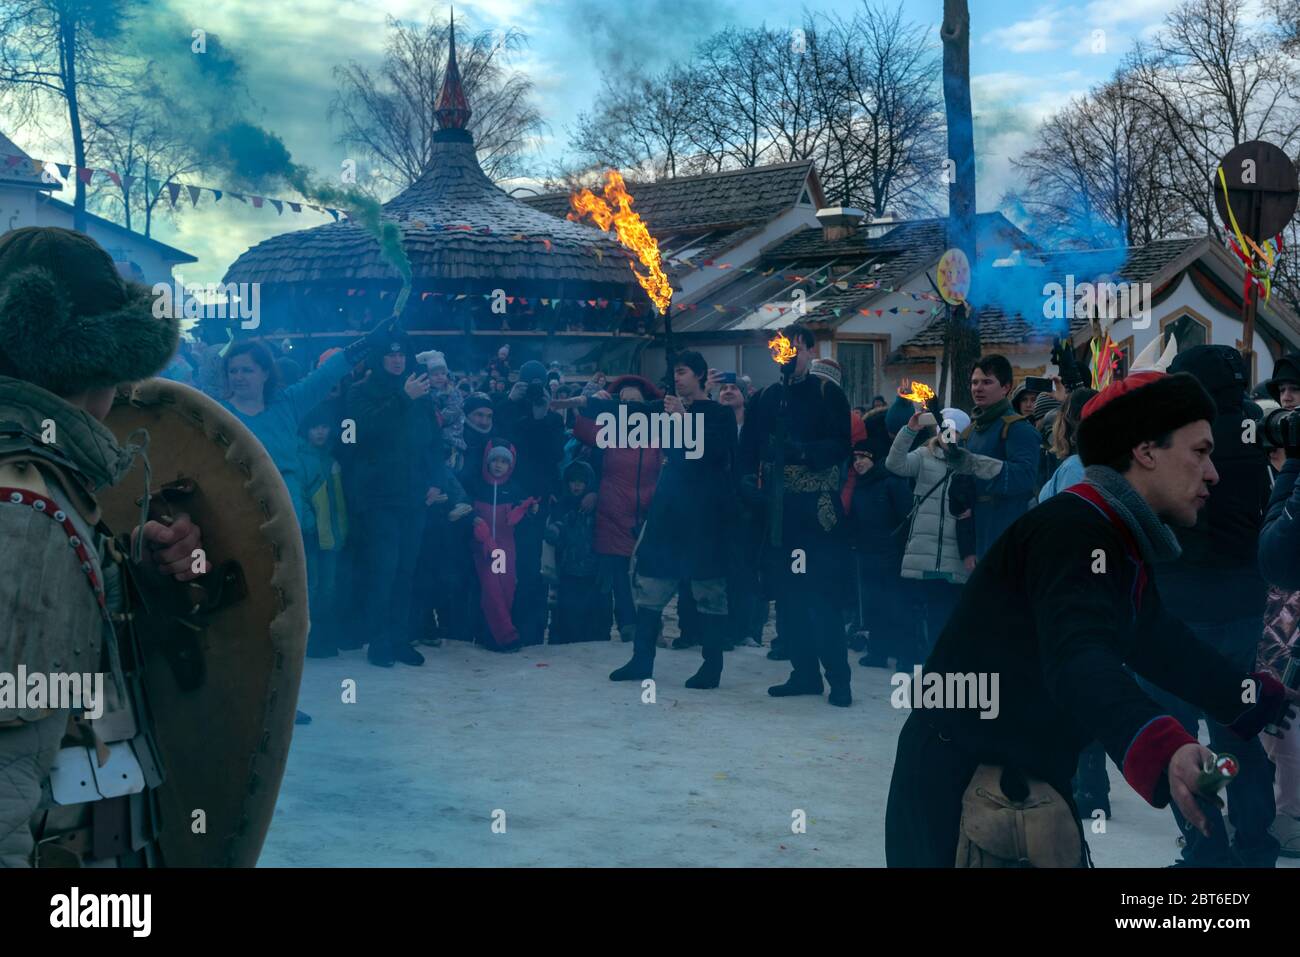 Burning of scarecrow to celebrate the arrival of spring on holiday Maslenitsa in Suzdal, Russia. Maslenitsa is an Eastern Slavic religious festival. Stock Photo